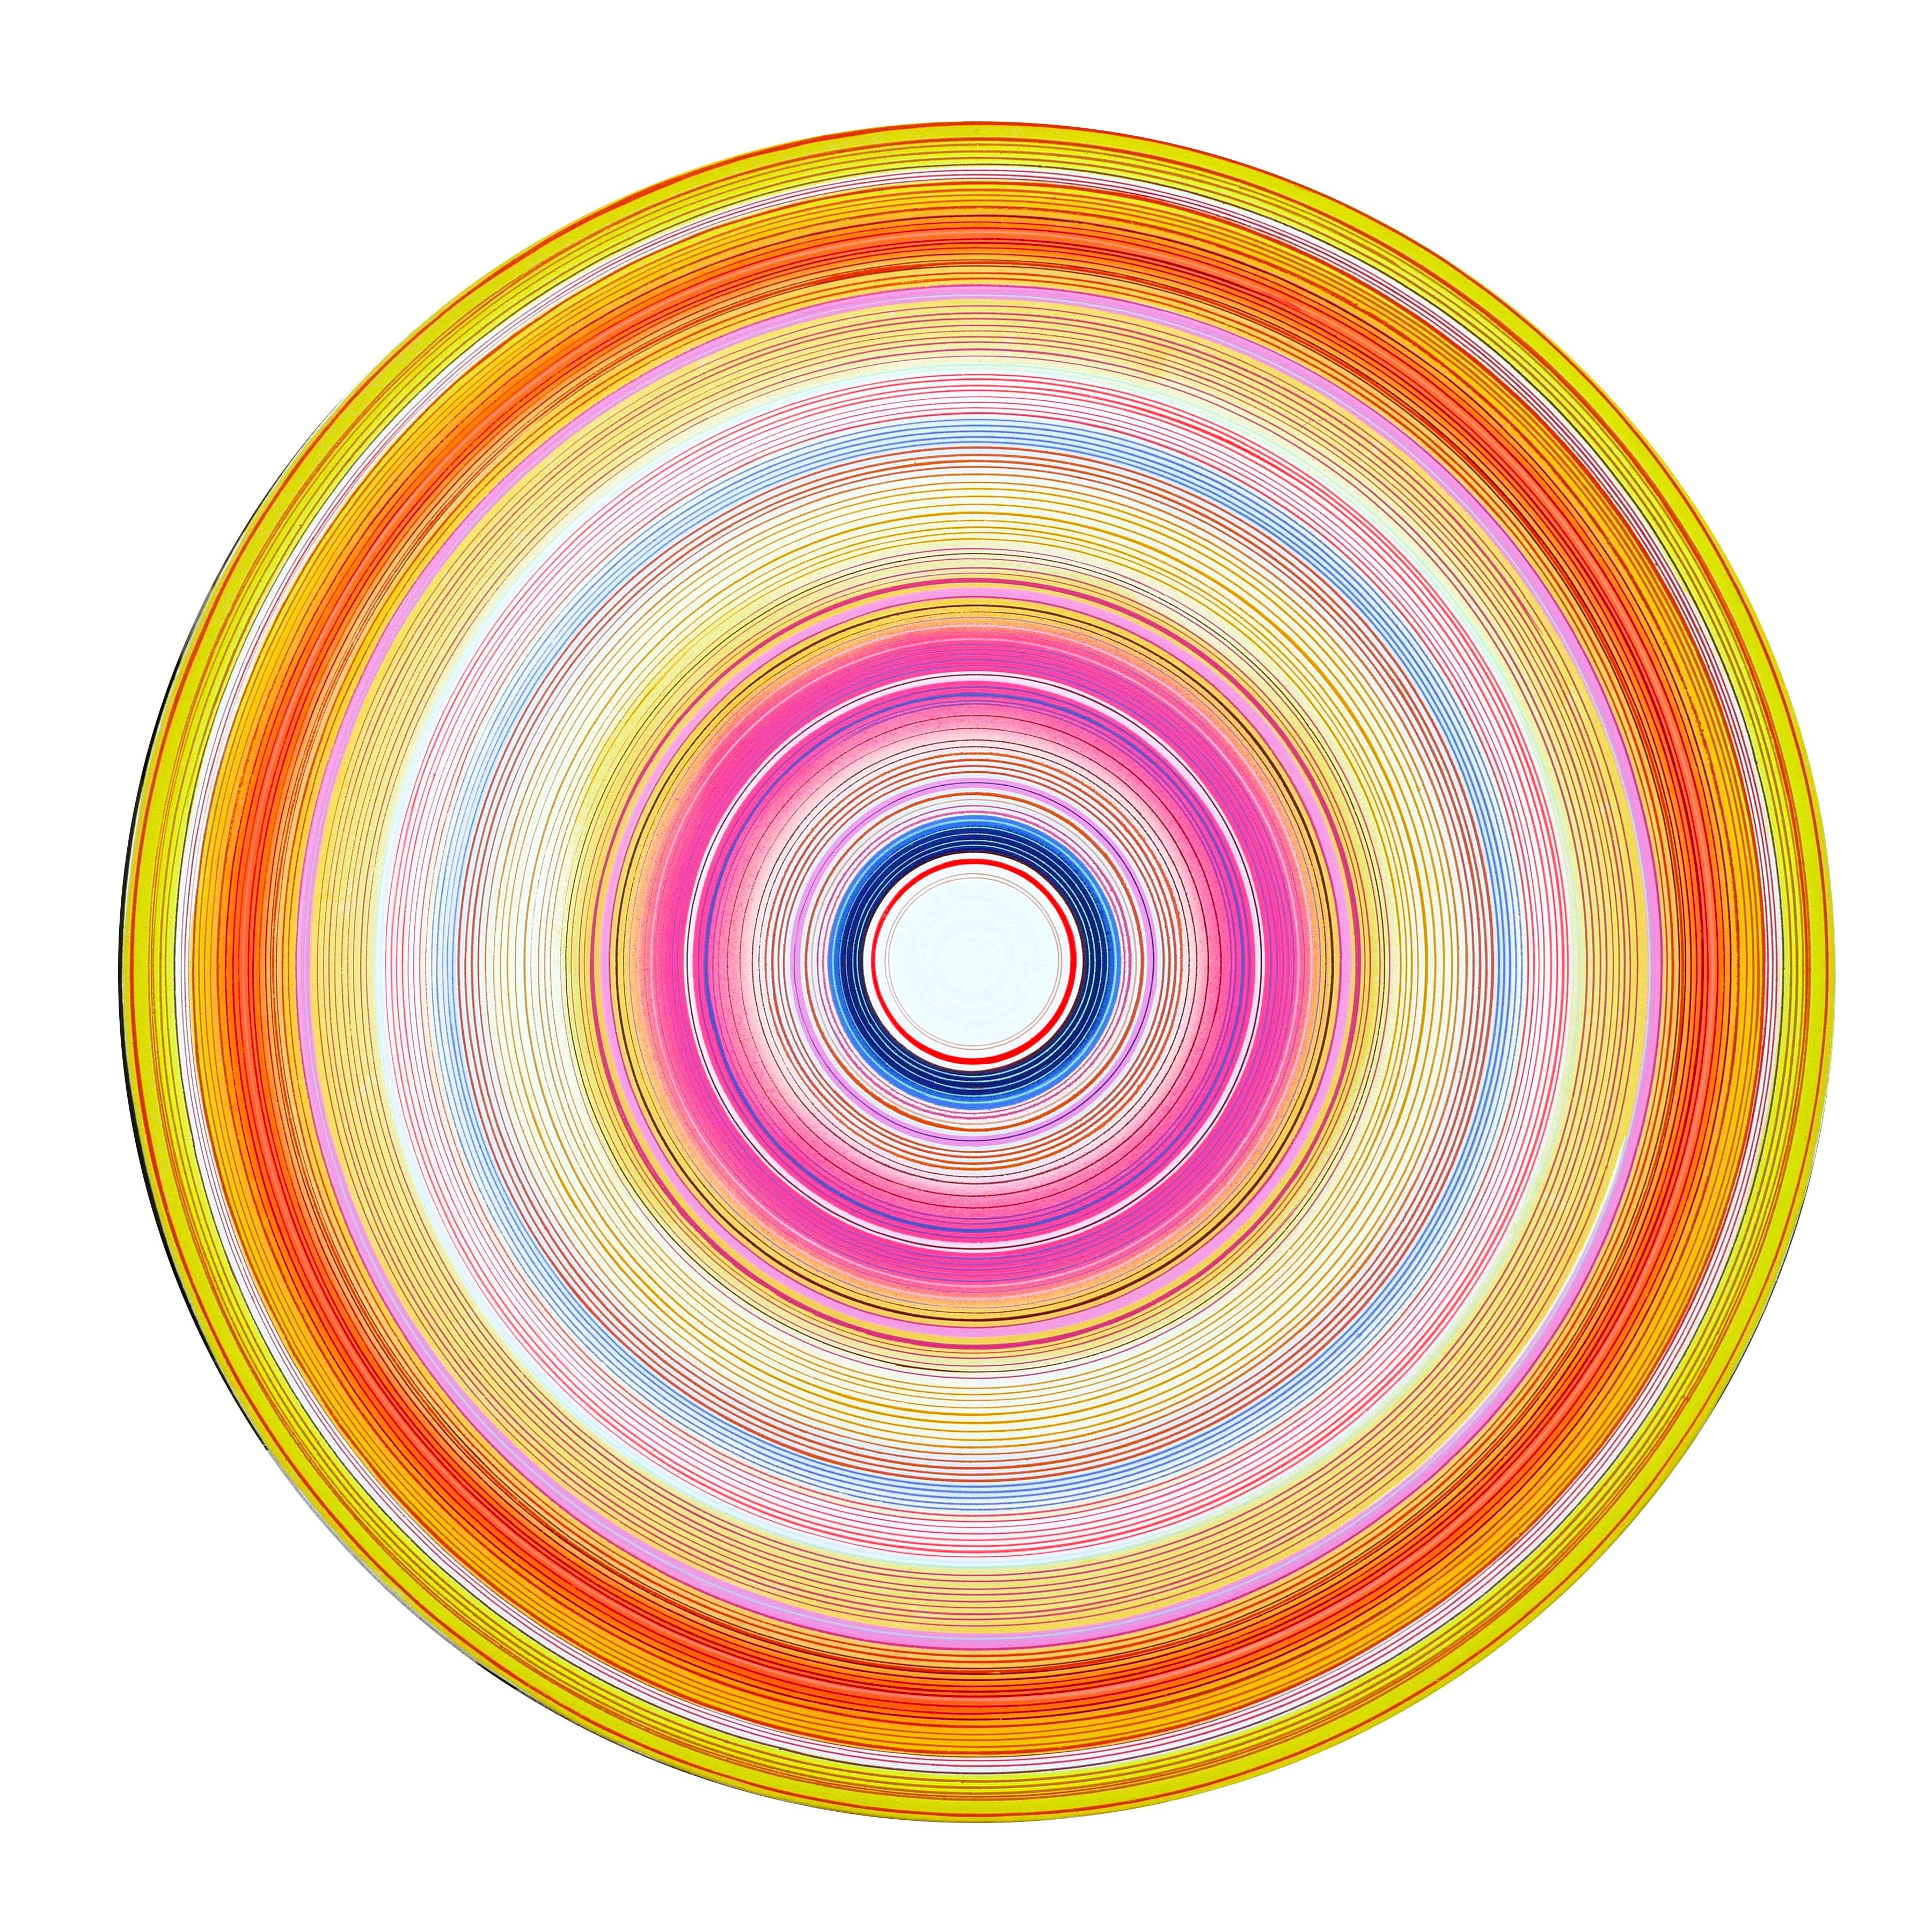 “Sorcerer” Contemporary Abstract Pink and Yellow Concentric Circle Painting - Mixed Media Art by David Hardaker